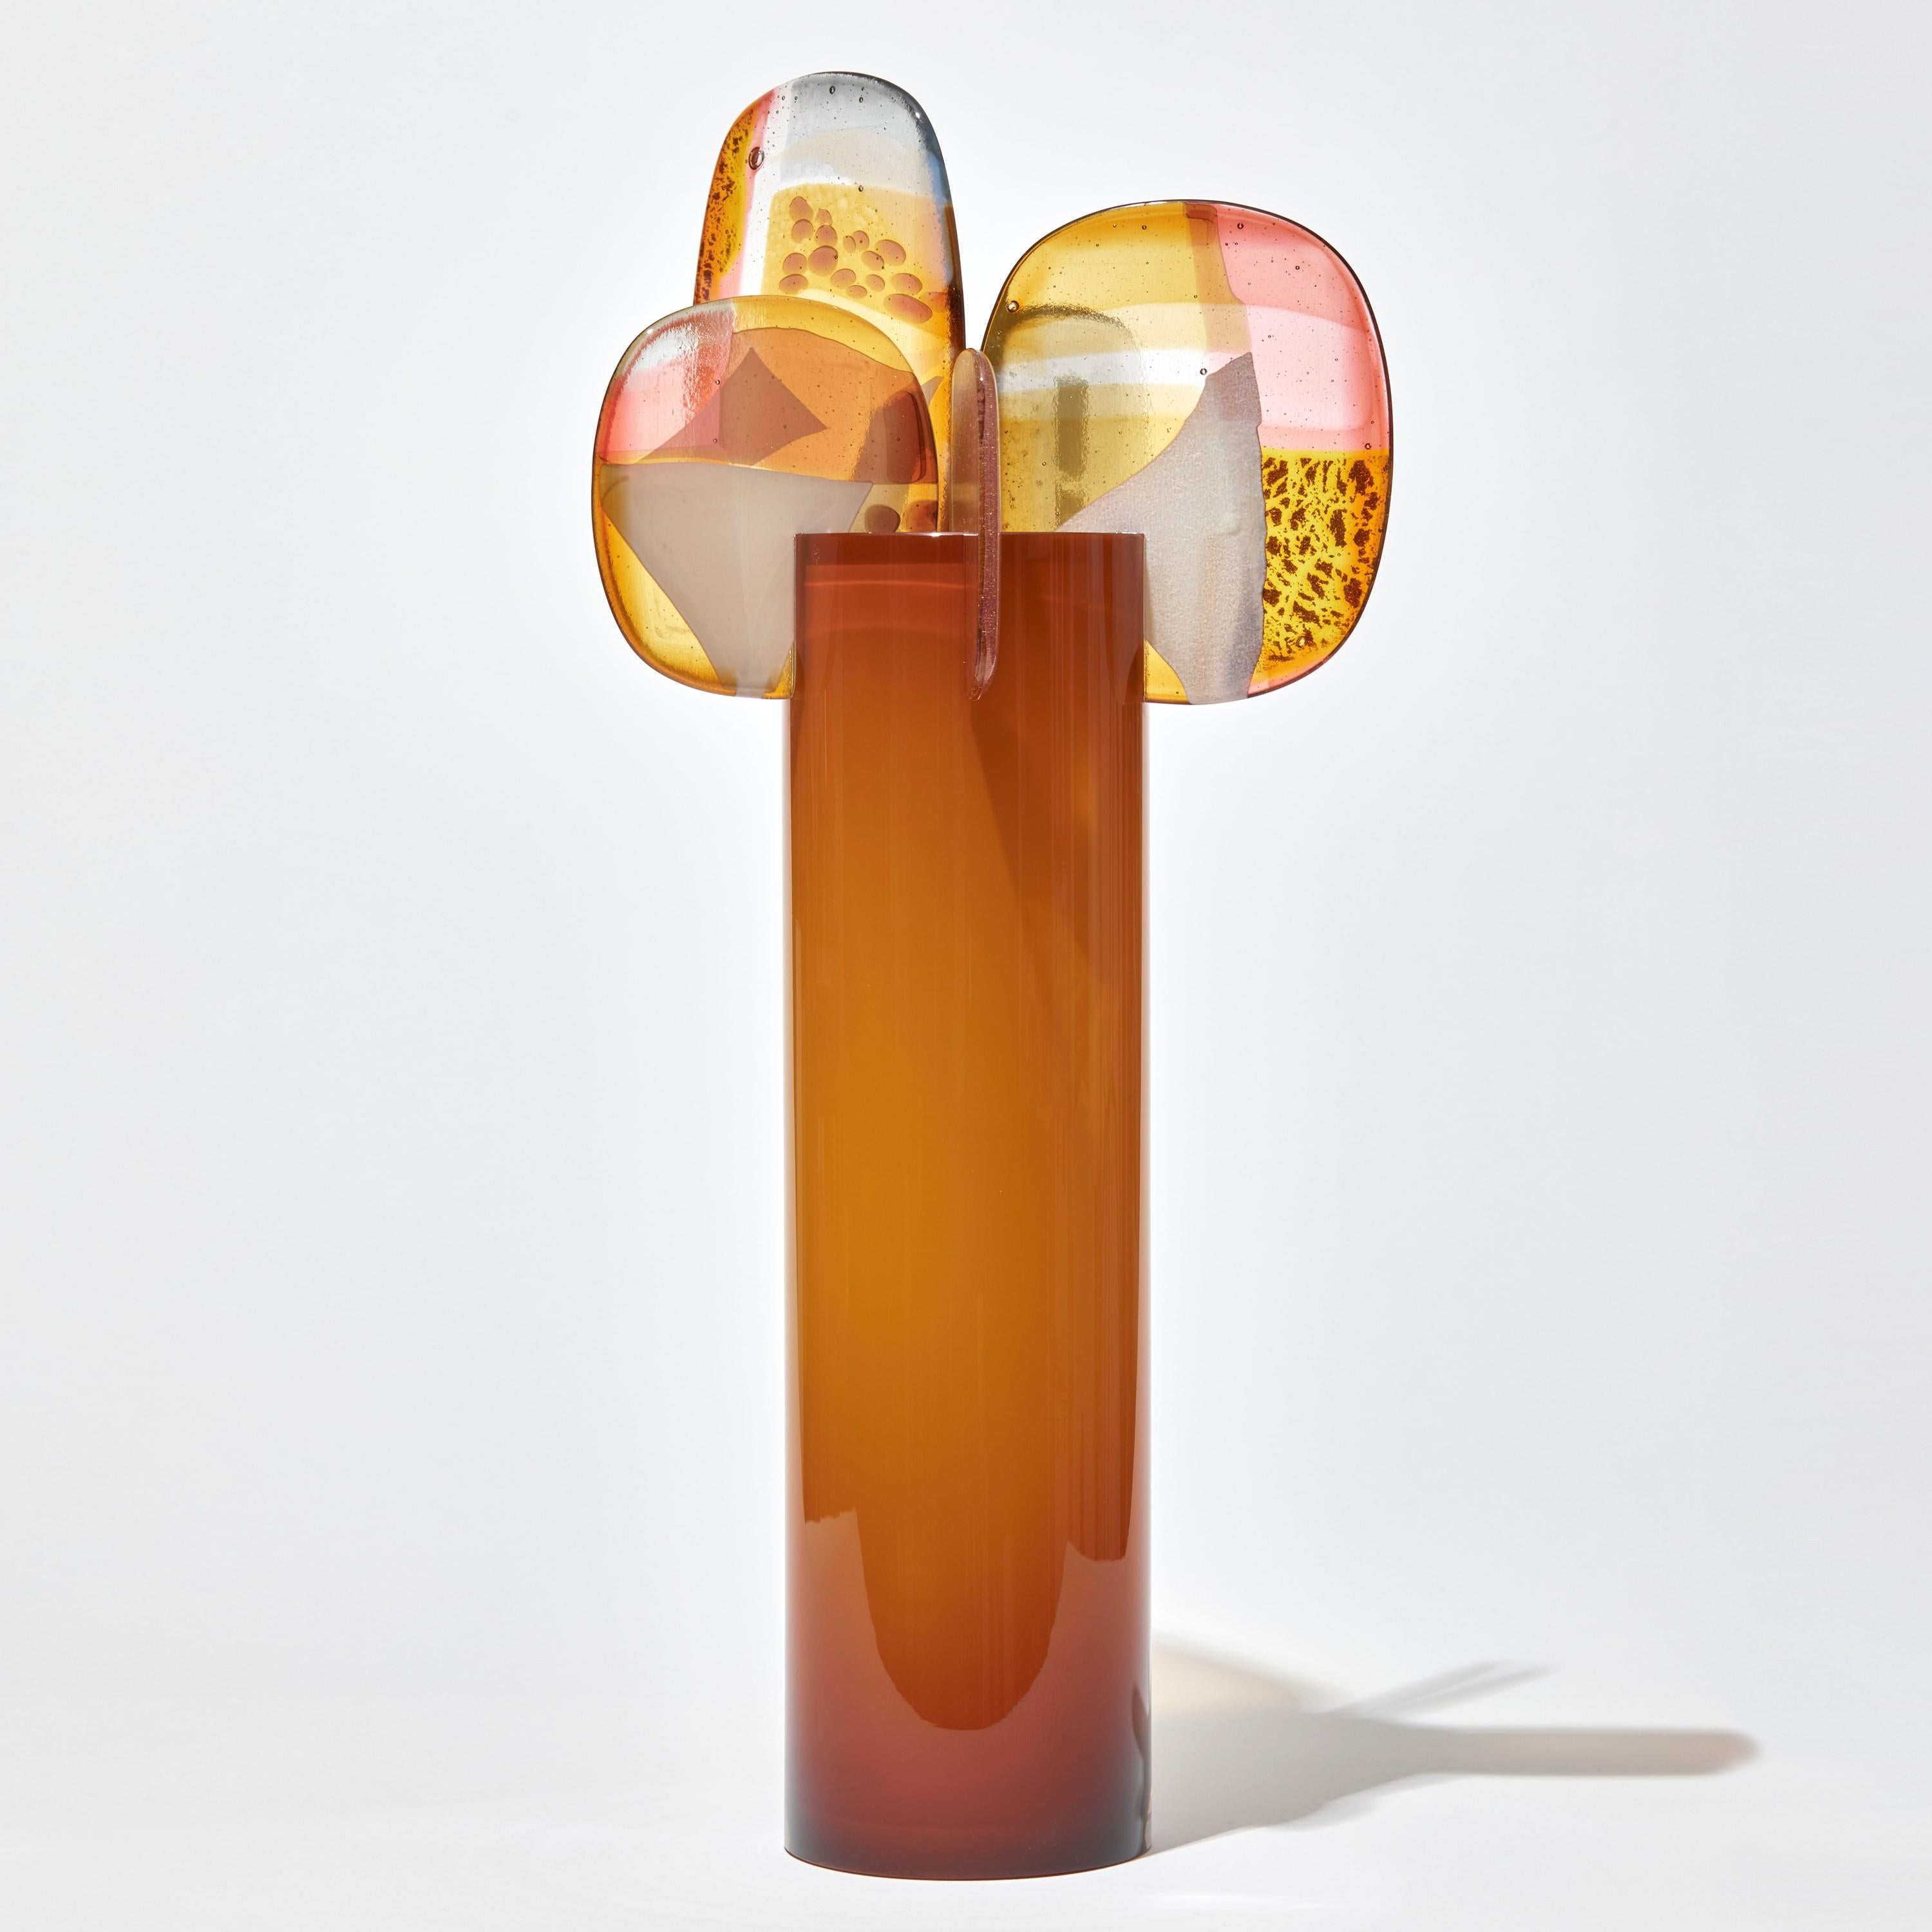 Organic Modern Paradise 04 in Amber, an orange, gold & pink glass sculpture by Amy Cushing